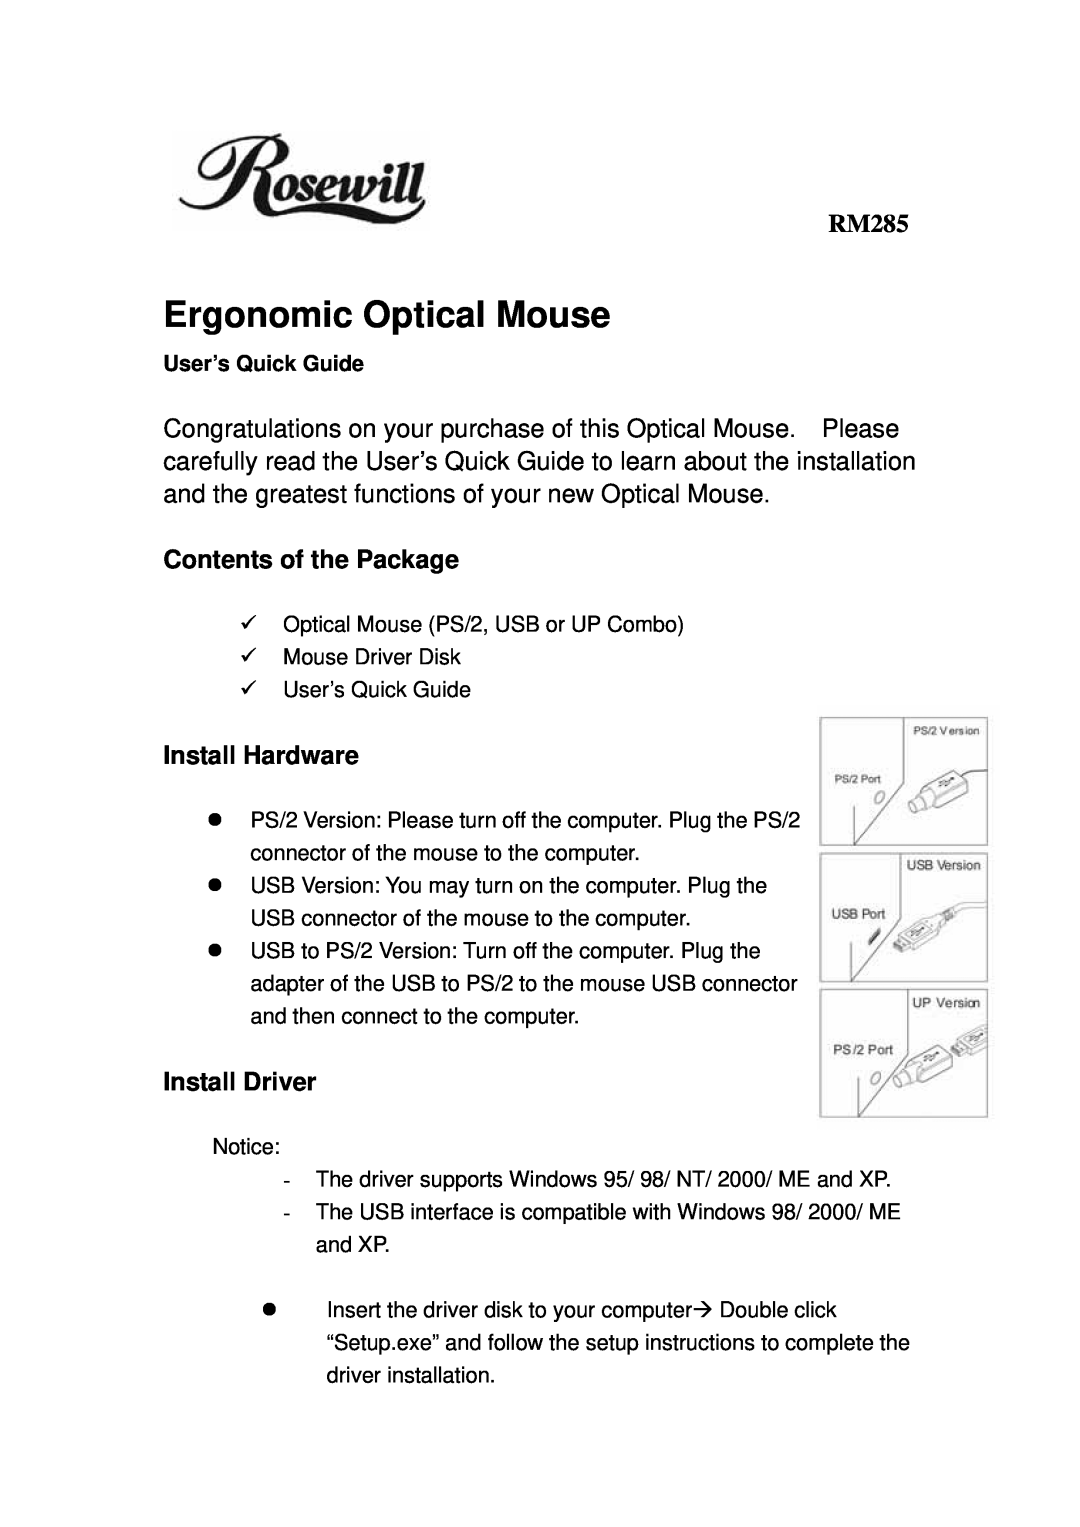 Rosewill RM285 manual Ergonomic Optical Mouse, Contents of the Package, Install Hardware, Install Driver 